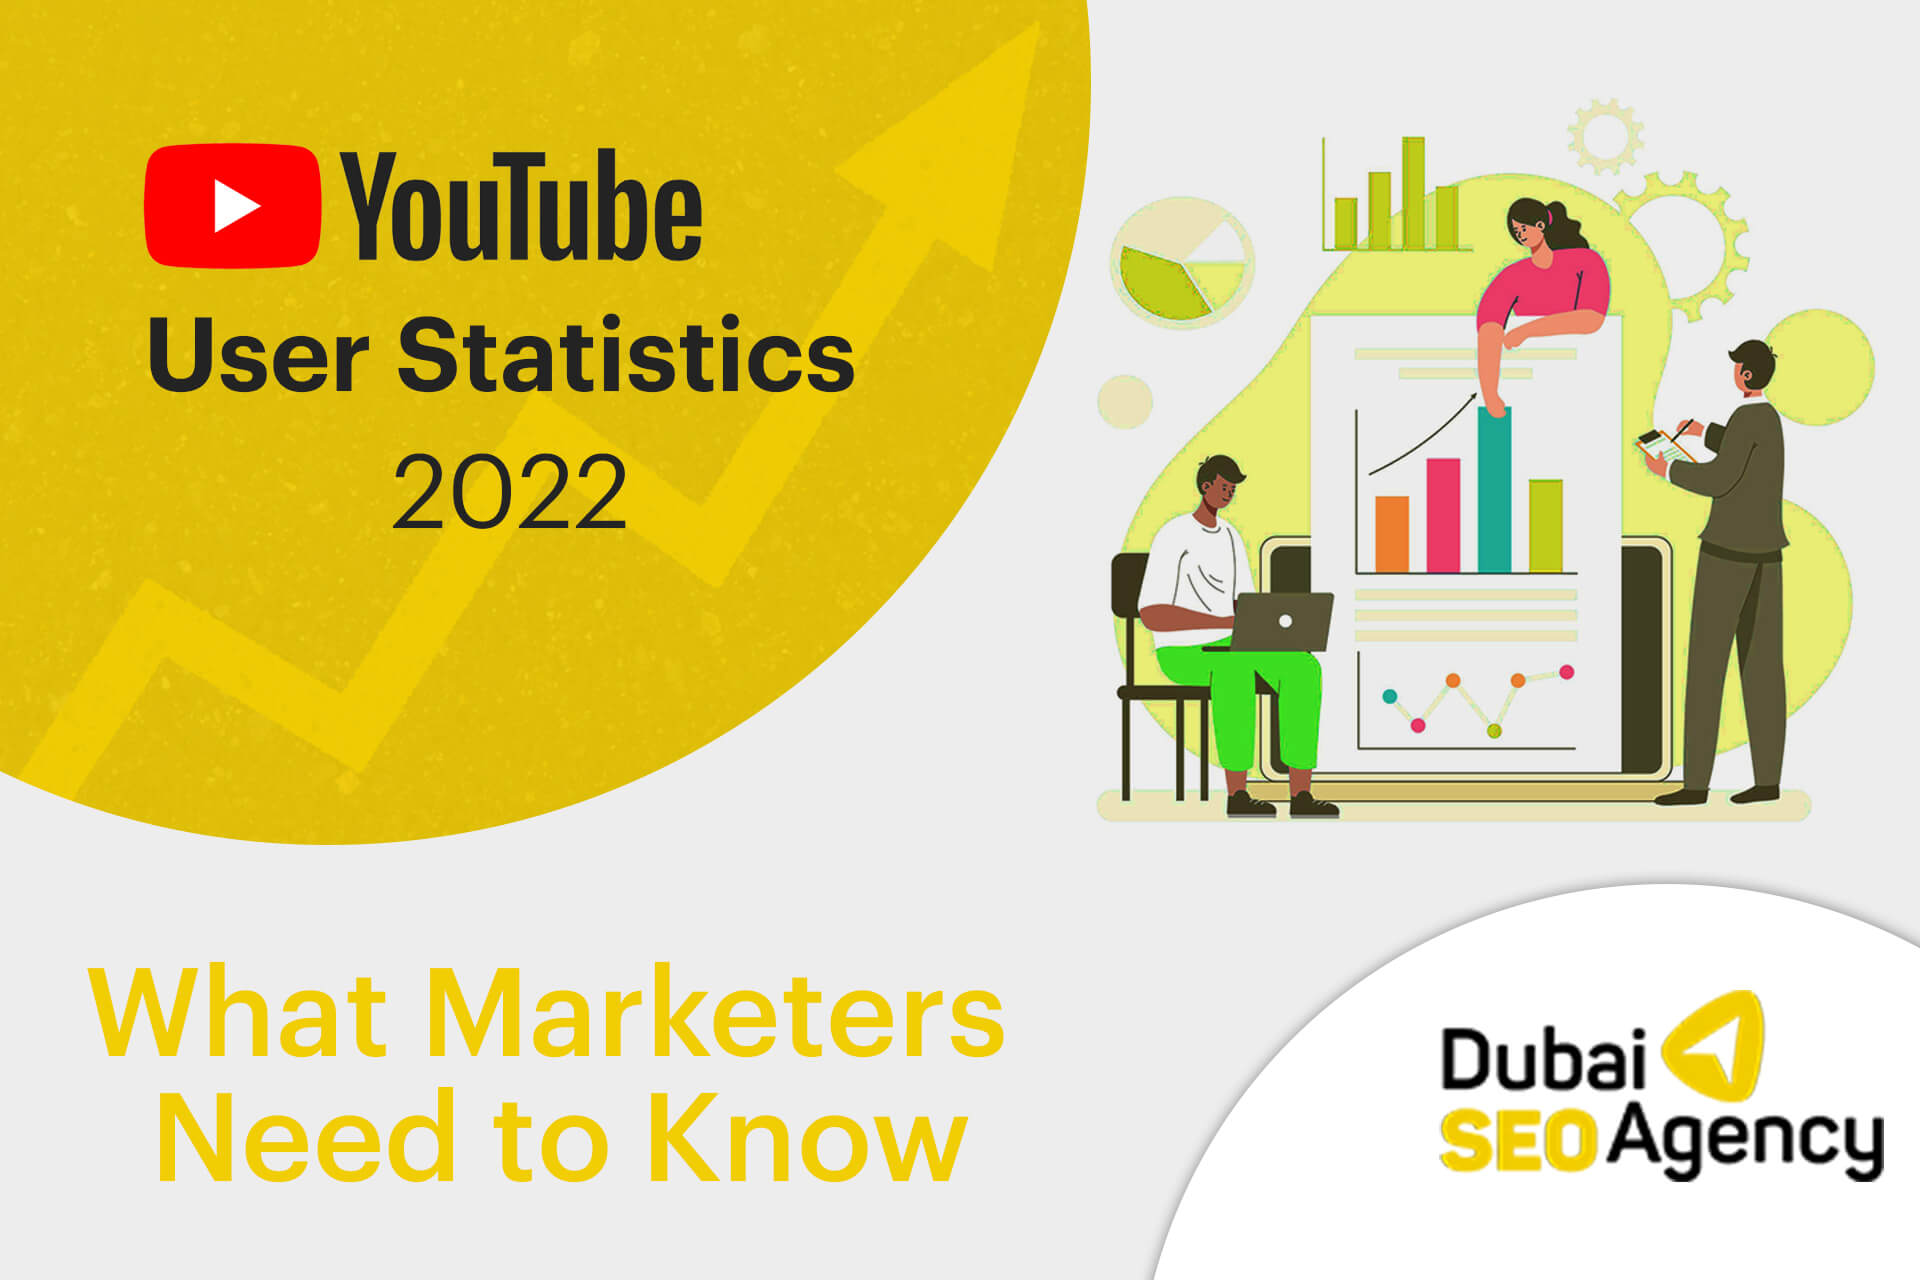 YouTube User Statistics 2022: What Marketers Need to Know